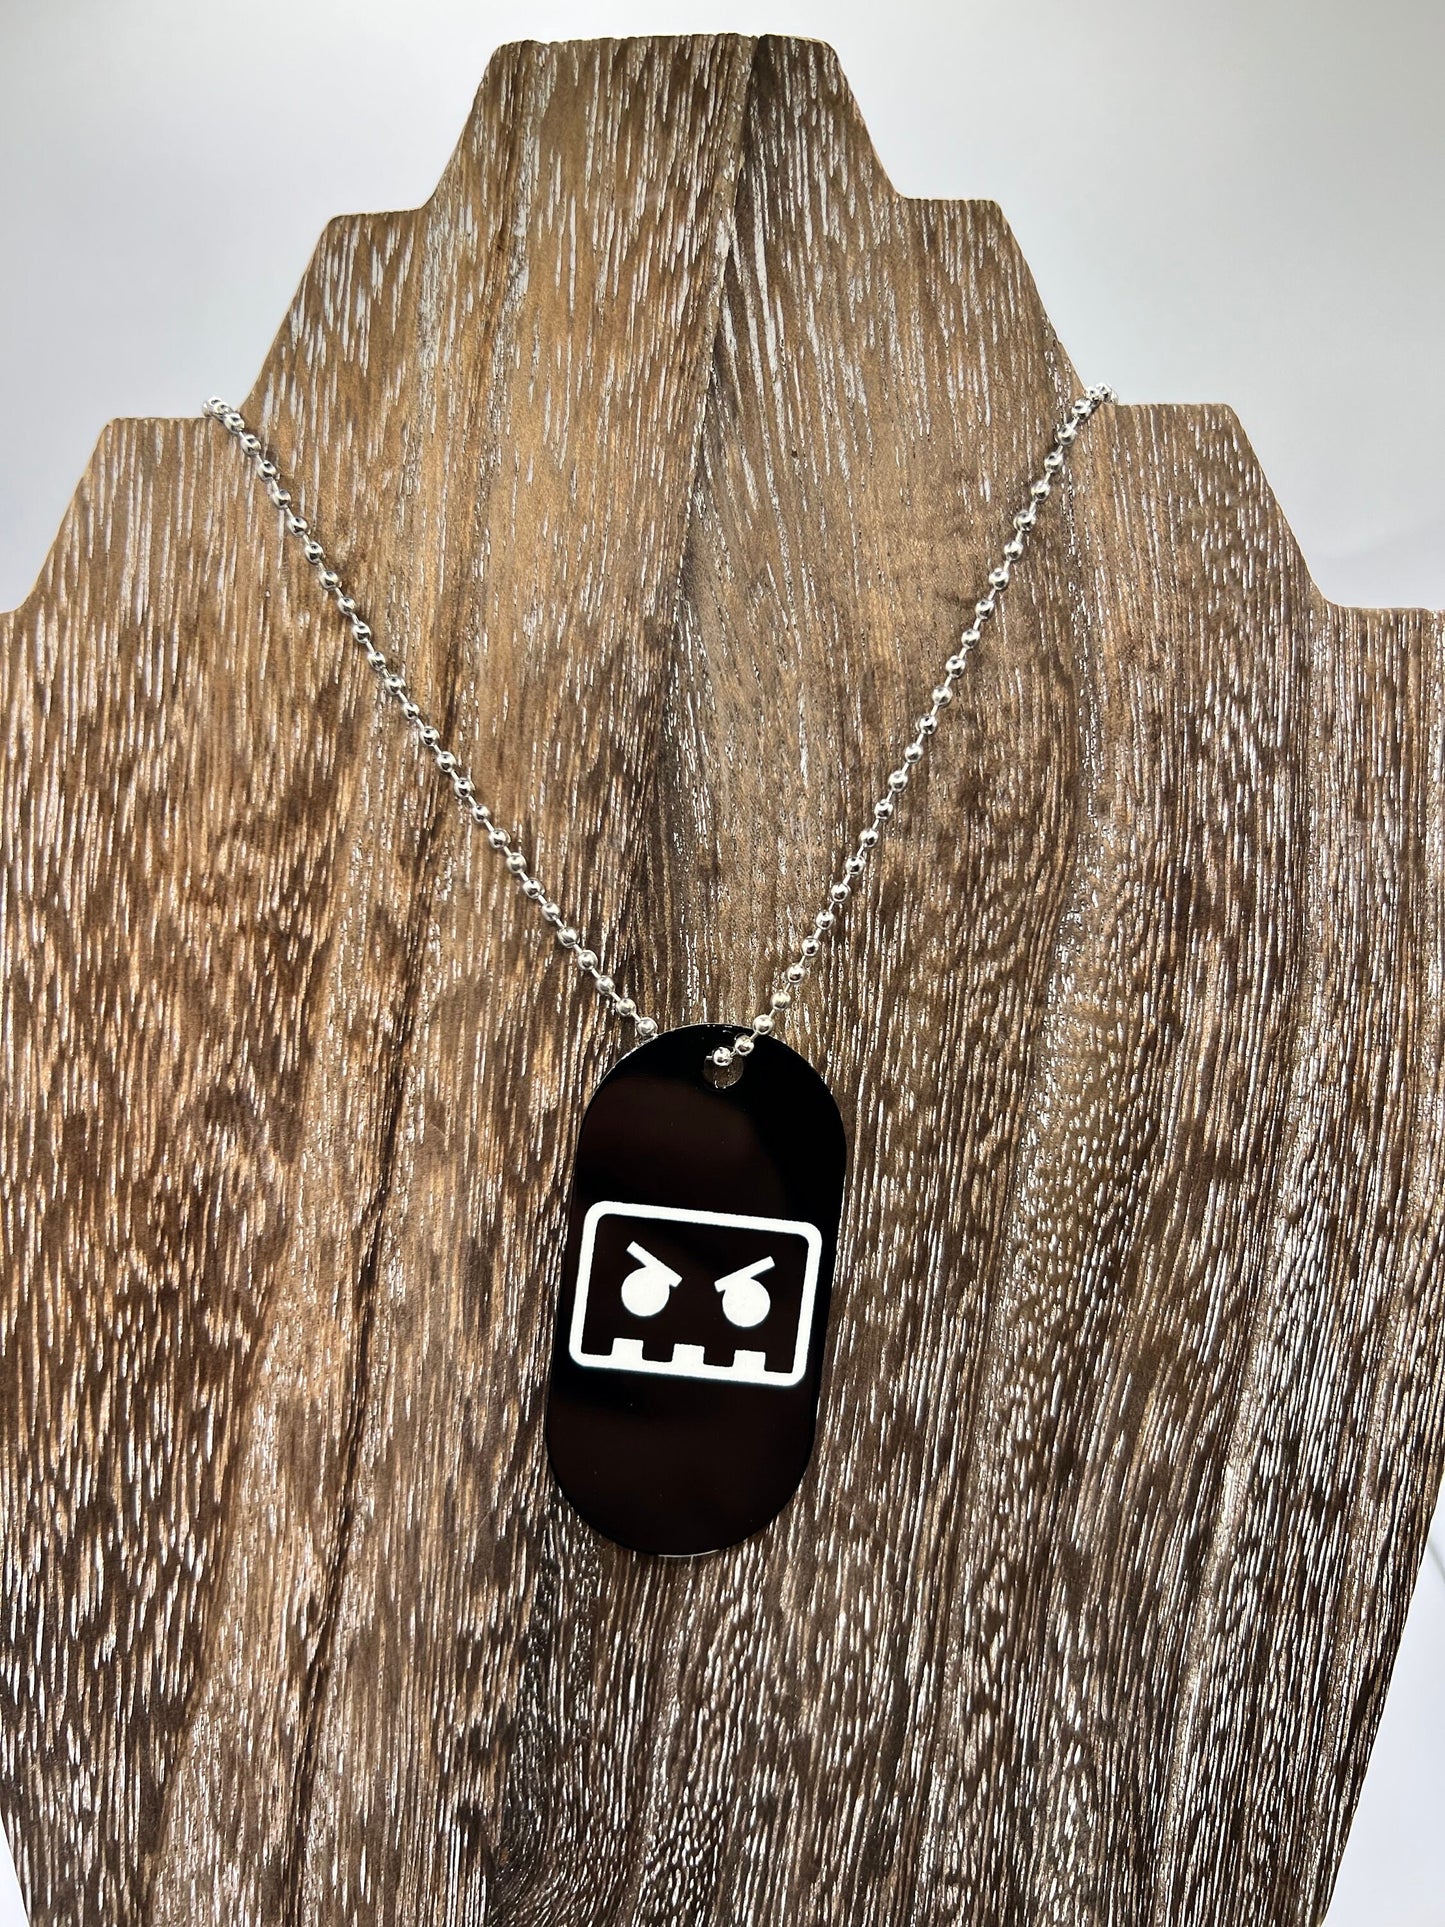 Barely Alive  double sided Necklace Dogtag Chain  Dubstep Rave EDM DJ Producer Bass trippy wubz Wook vibe peace love retro